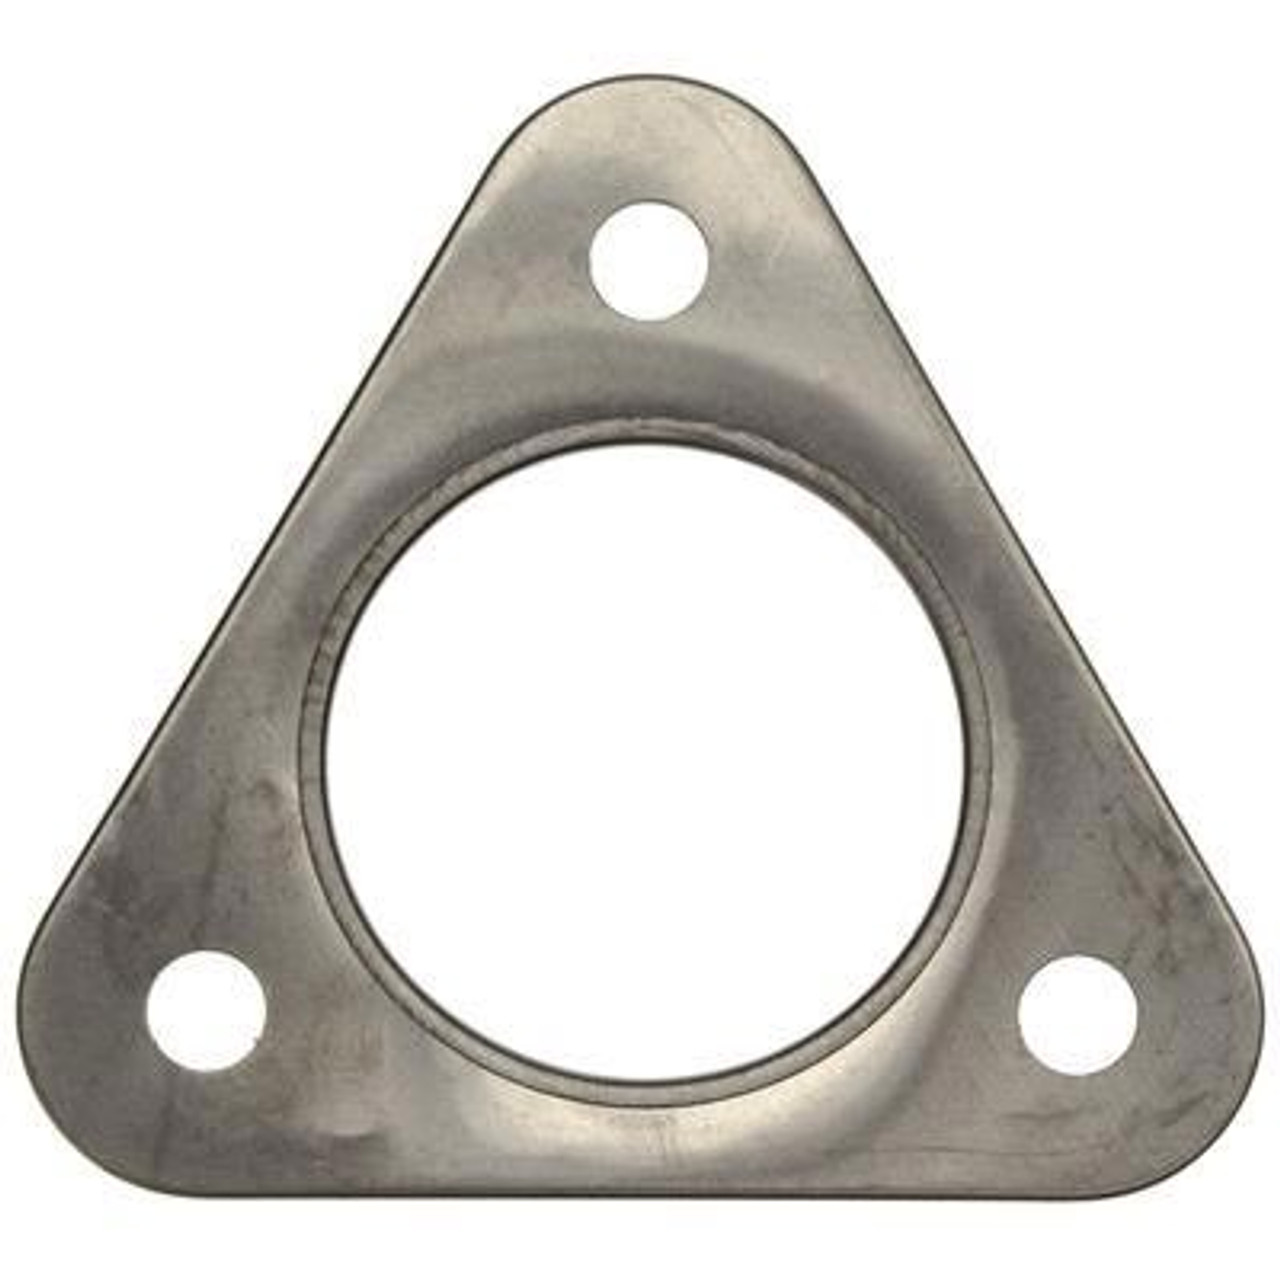 Mahle 6.7L Powerstroke Exhaust Manifold To Up-Pipe Gasket